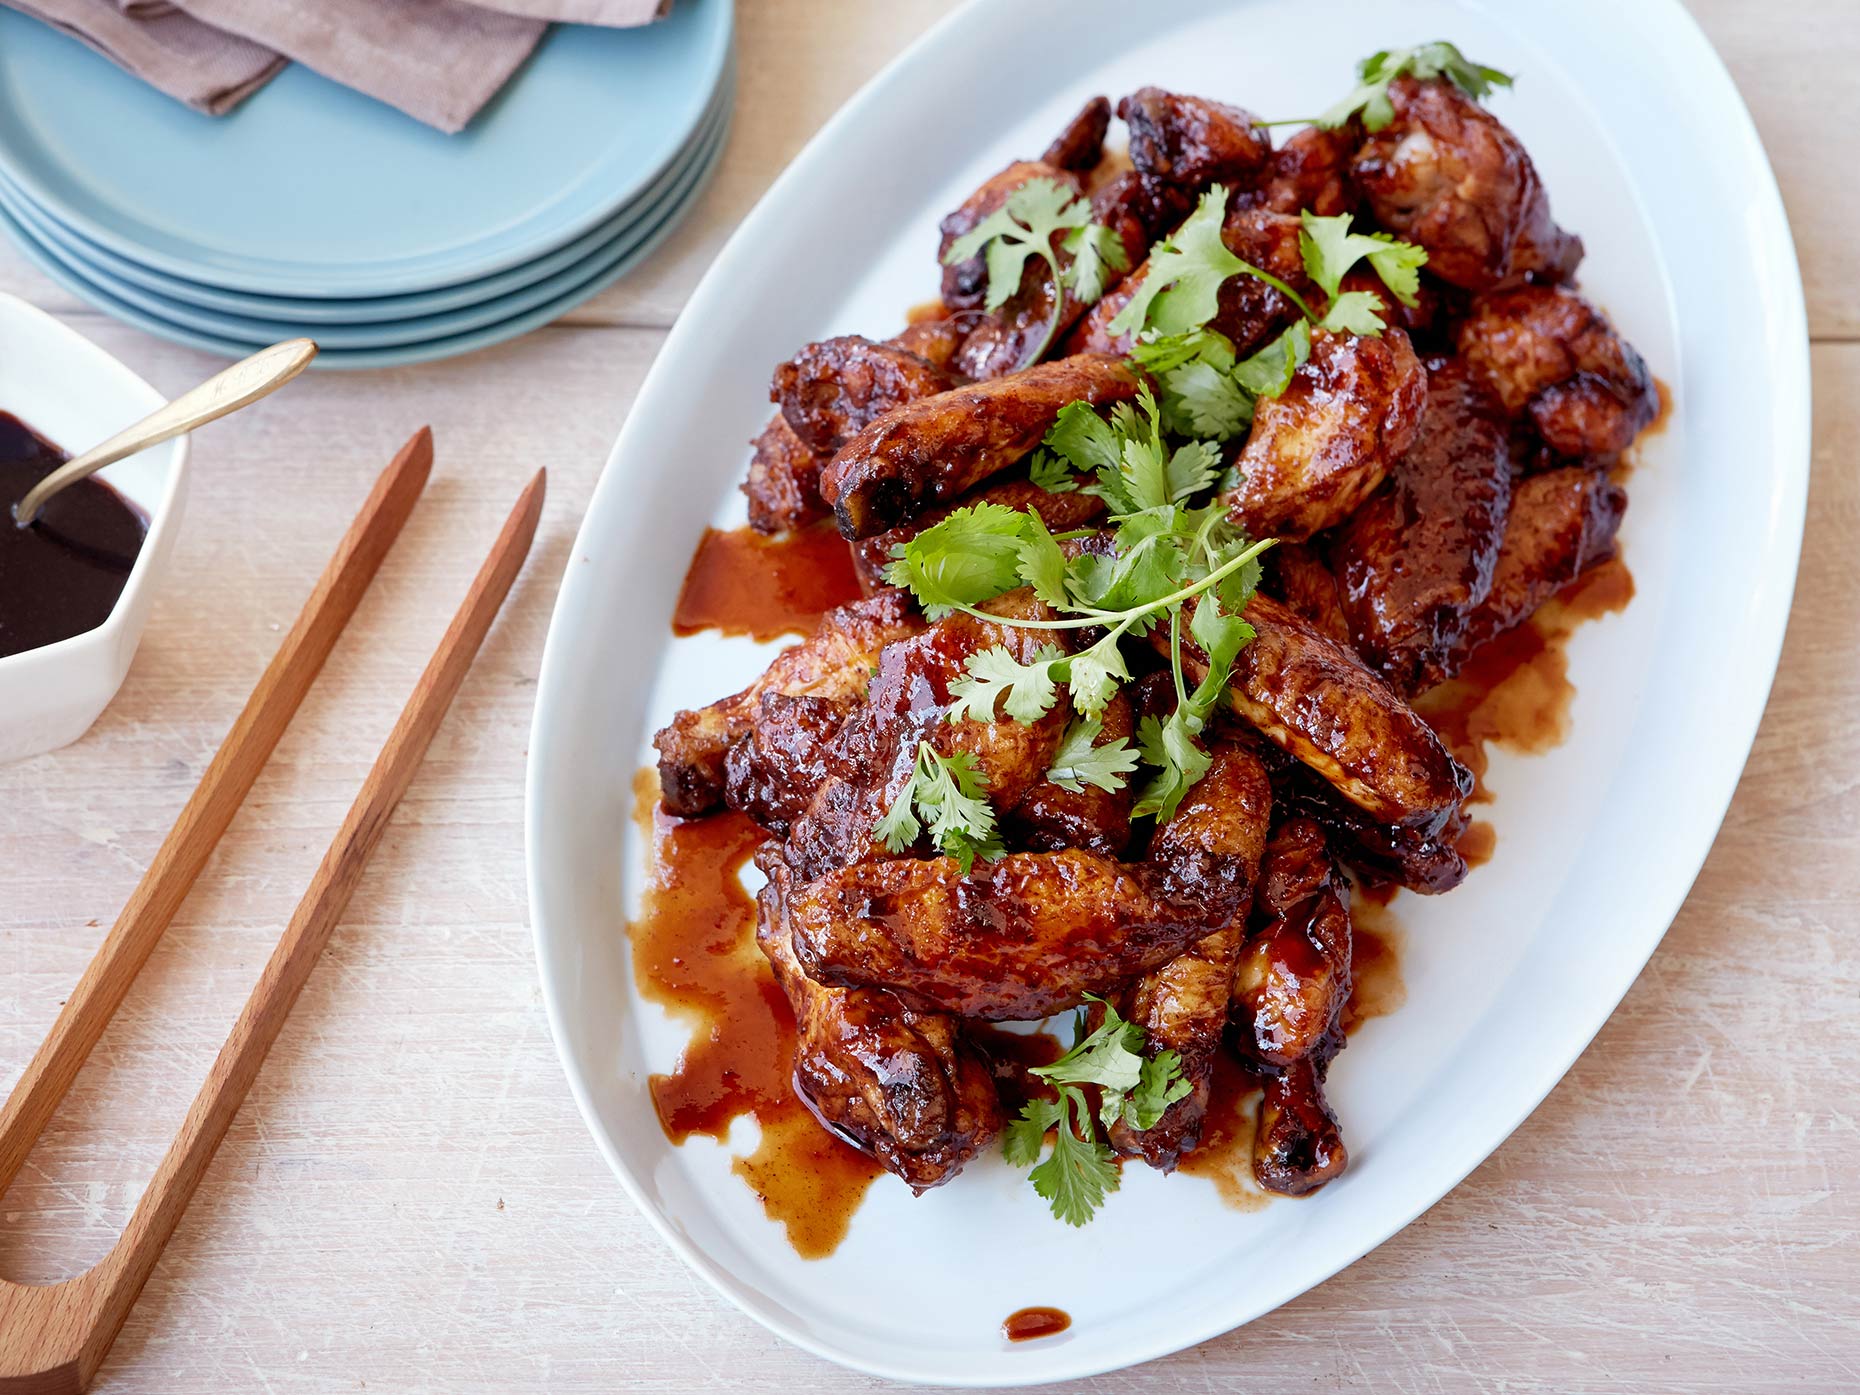 CanadaDry_SpicyChickenWings_H_0001_for_web